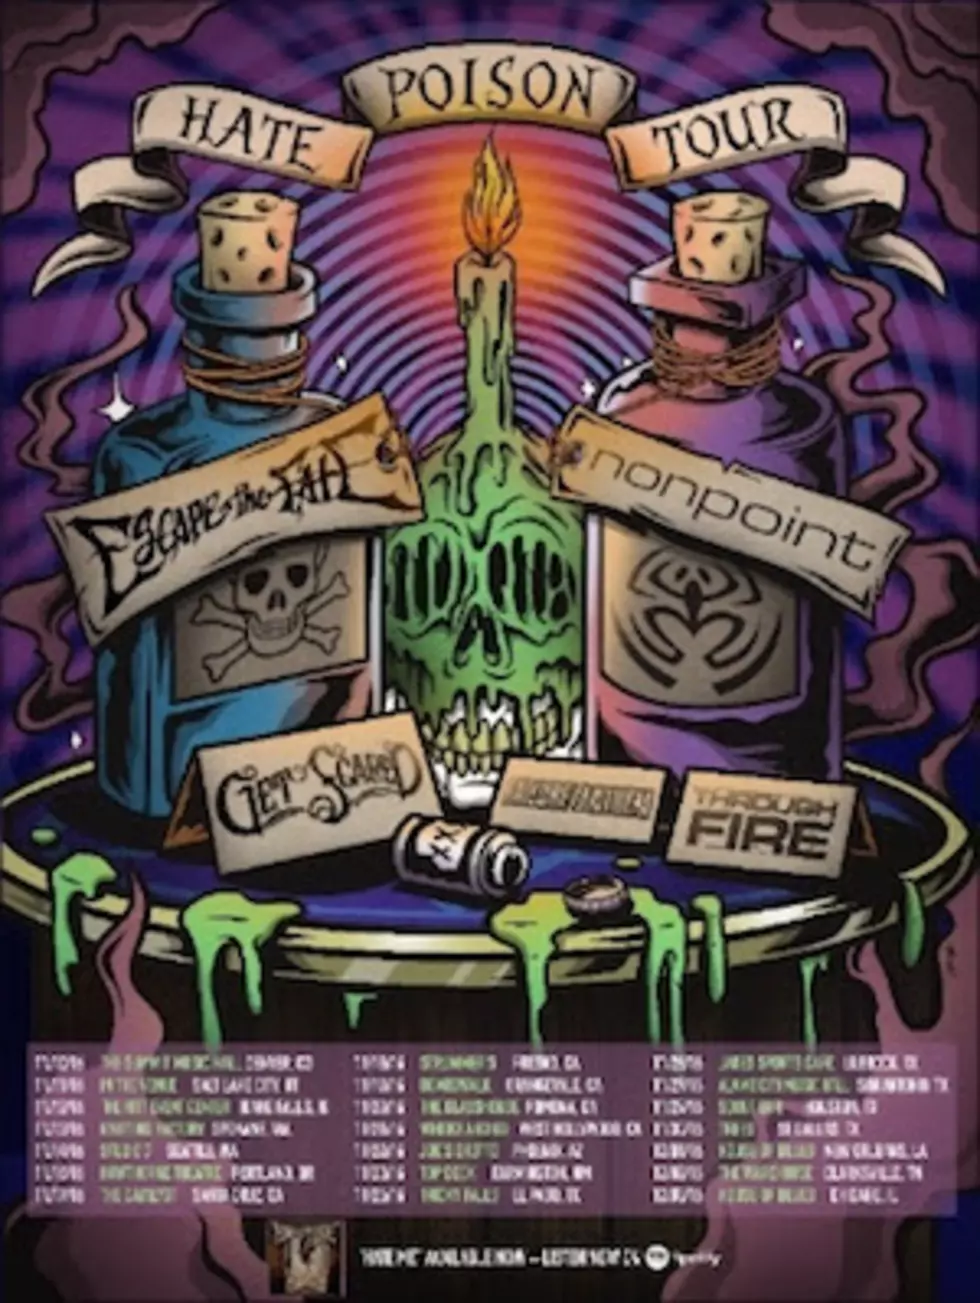 Escape the Fate + Nonpoint to Embark on 2016 Co-Headlining Tour